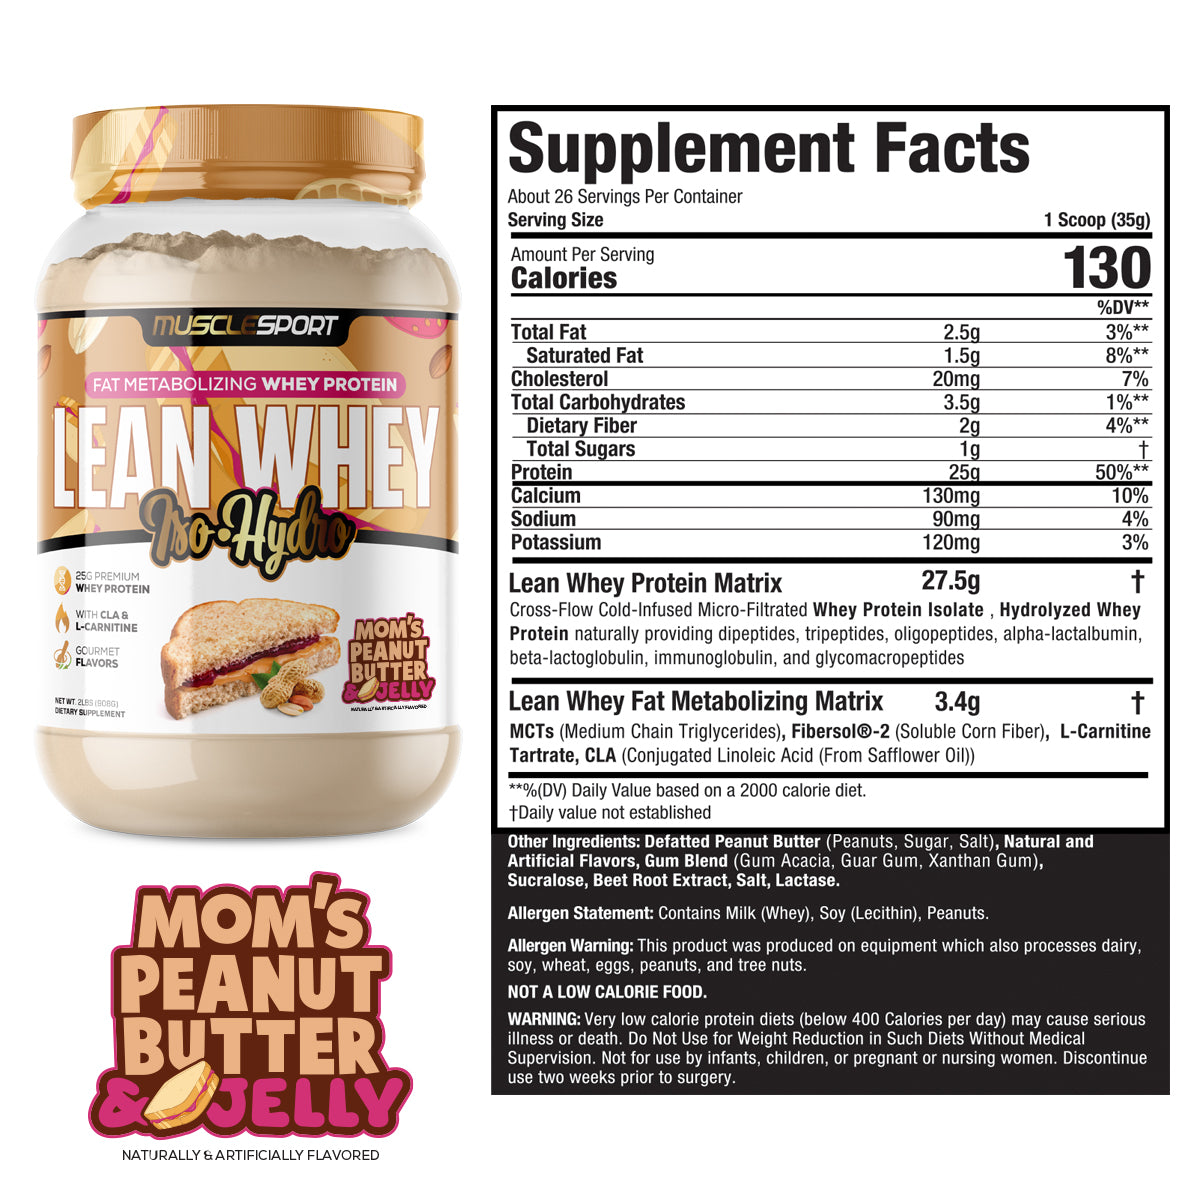 Mom's Peanut Butter & Jelly Lean Whey